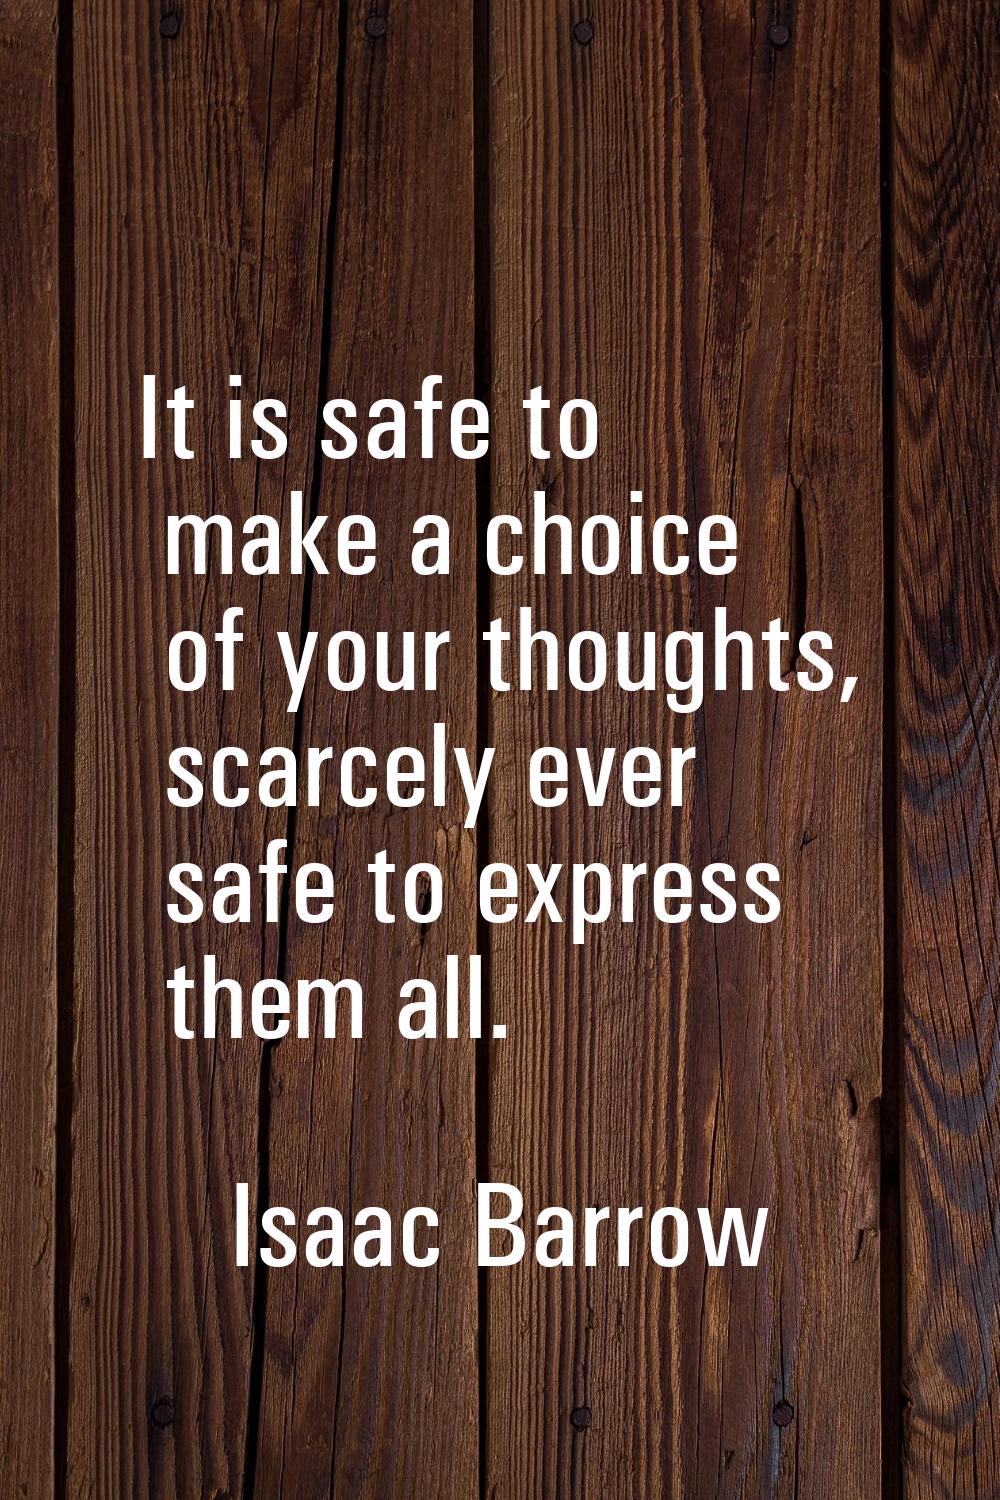 It is safe to make a choice of your thoughts, scarcely ever safe to express them all.